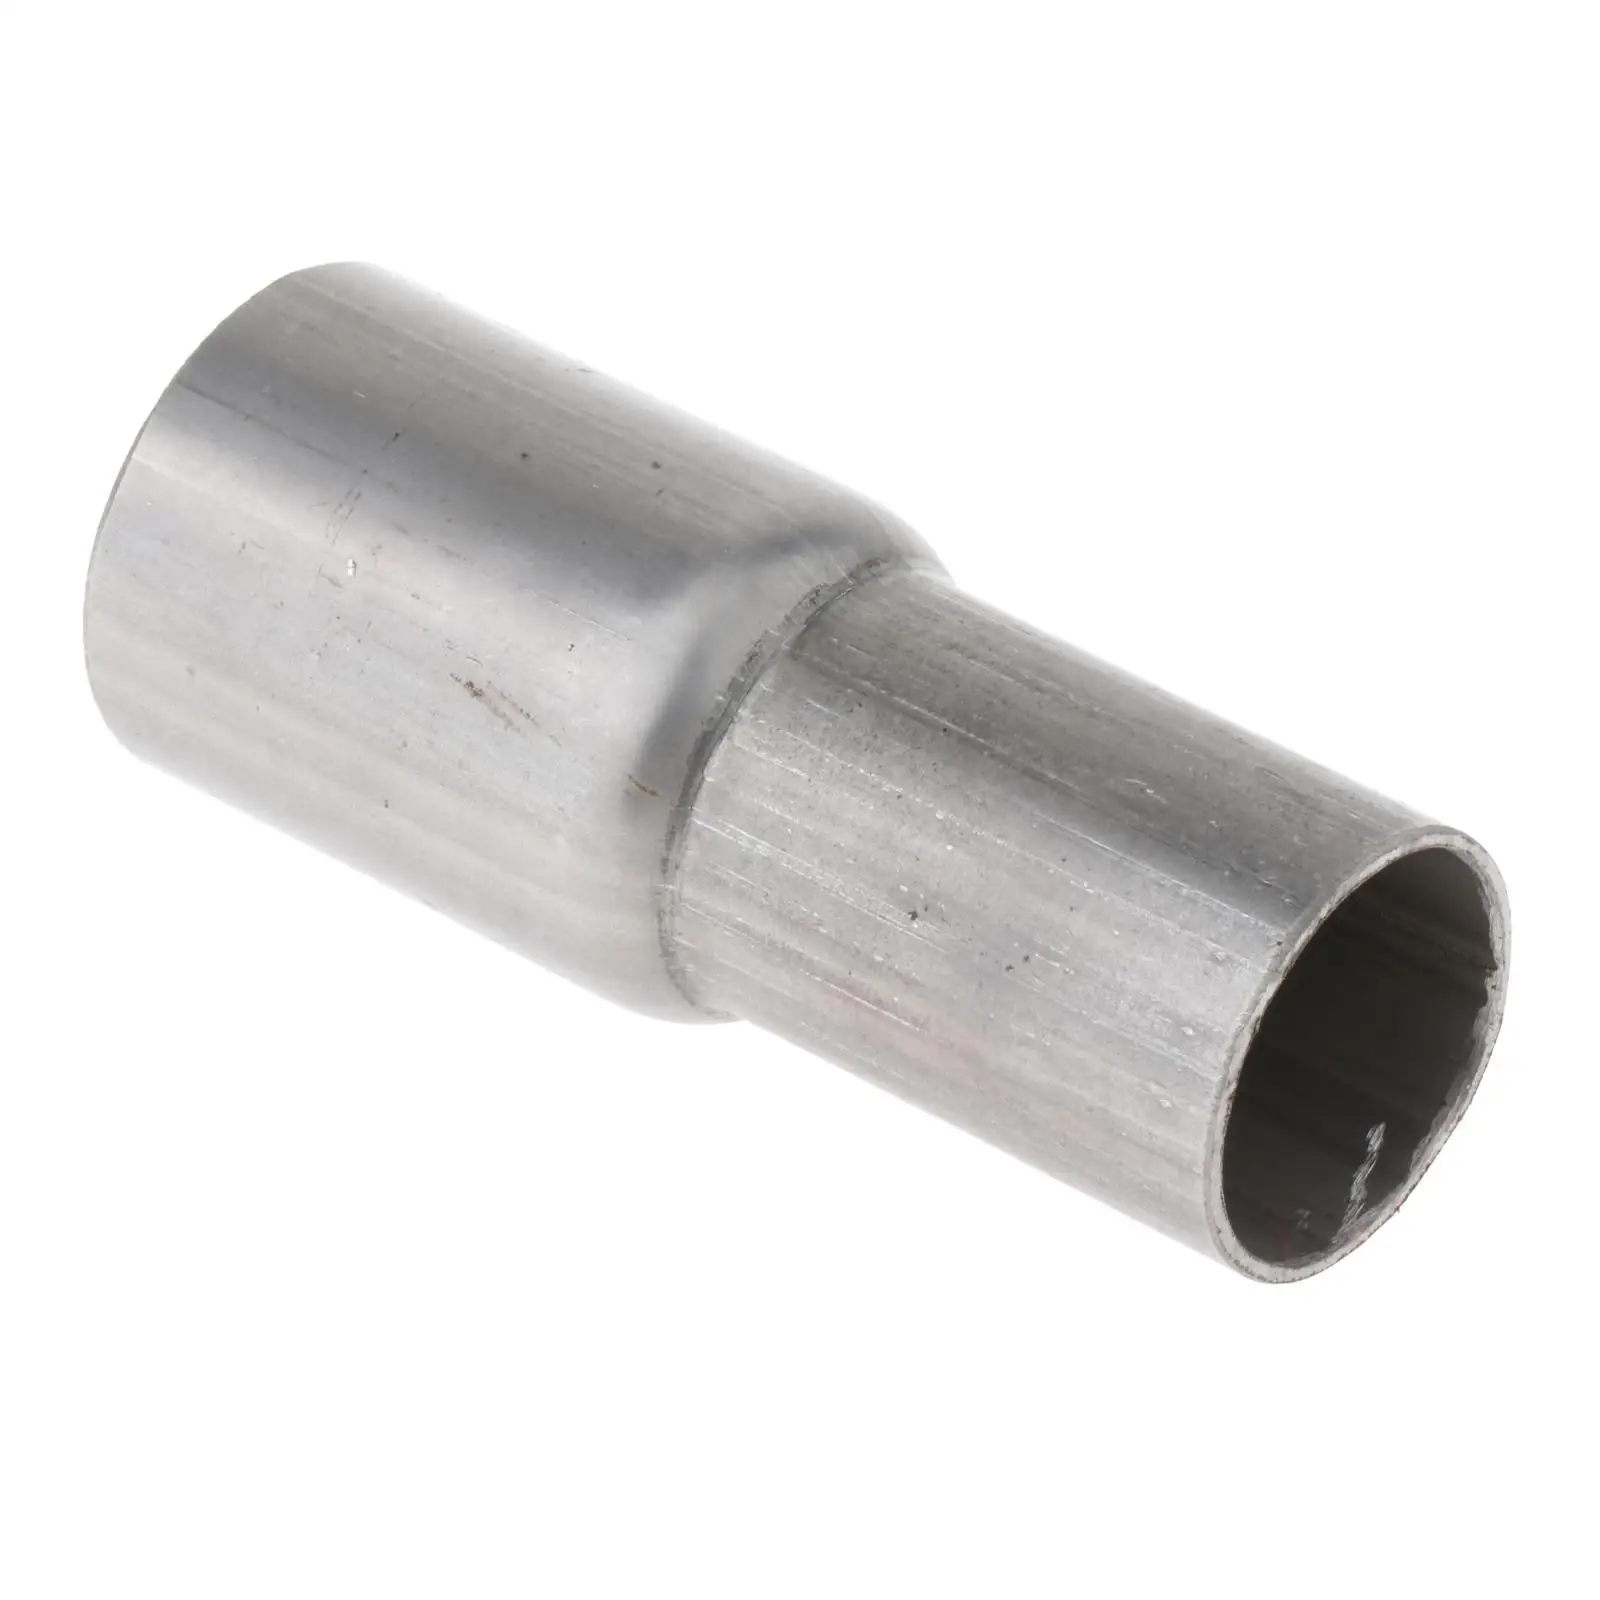 Exhaust Connector Pipe Sturdy Durable Coupler Universal Exhaust Pipe Adapter